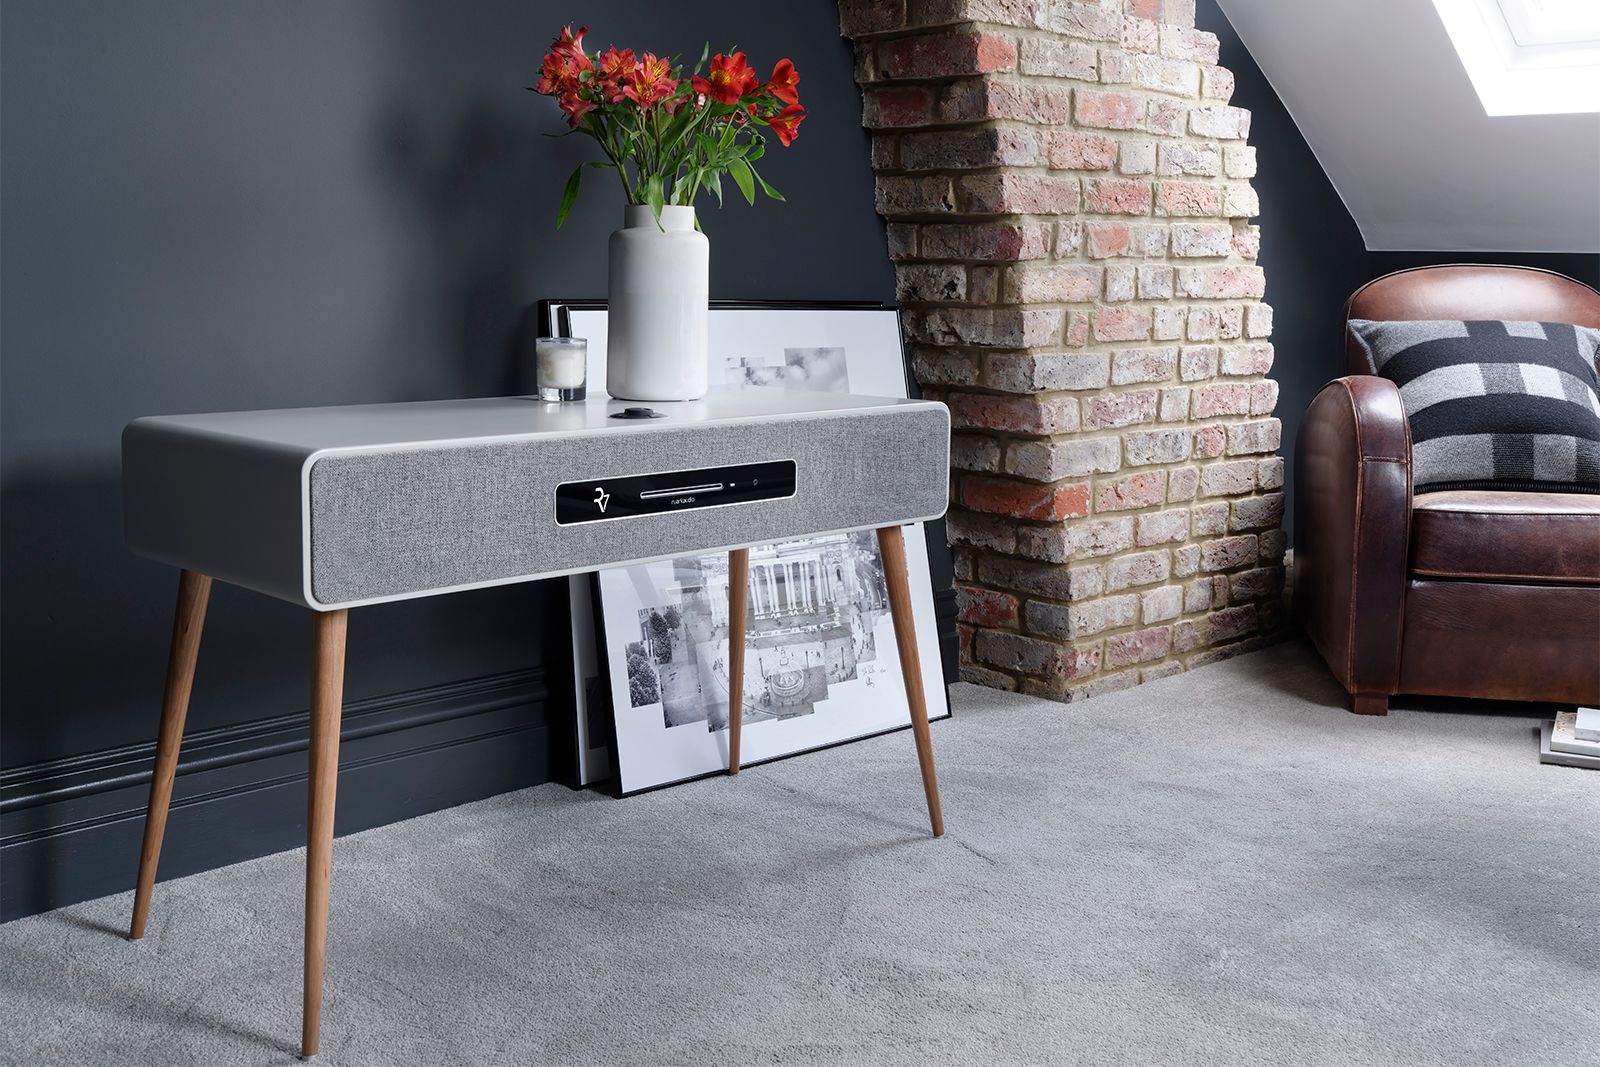 Ruark Audio R7 MKIII radiogram is all the music system you could ever need image 1